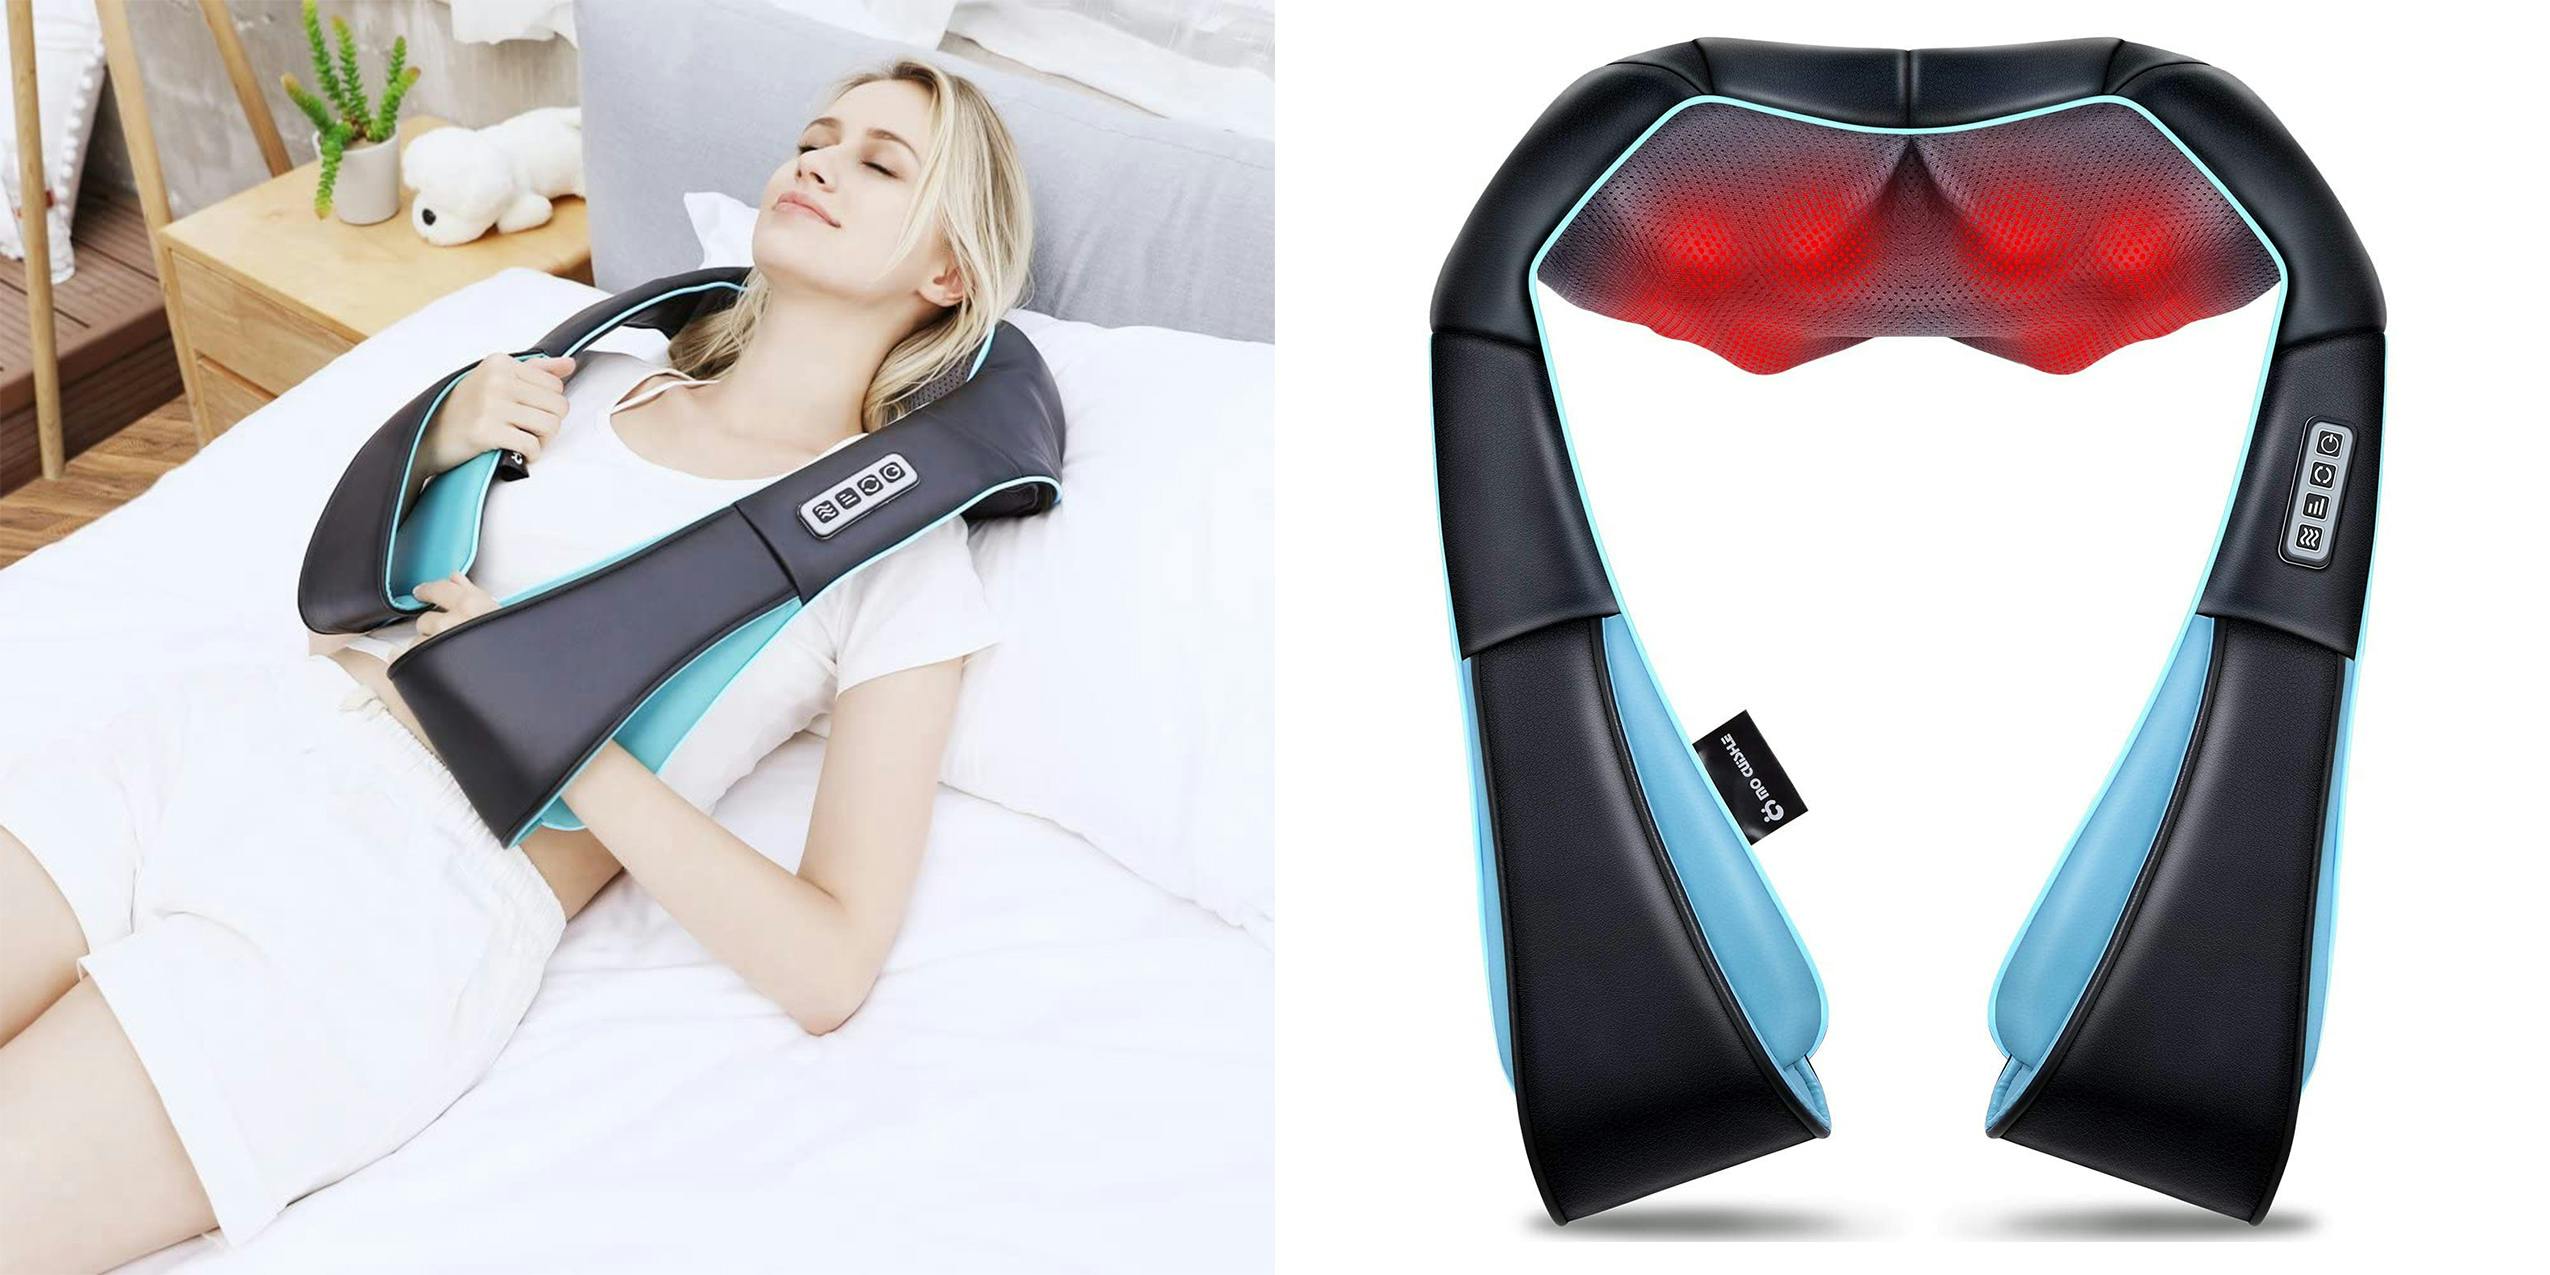 A woman wearing an electronic Shiatsu massager along with its product picture.